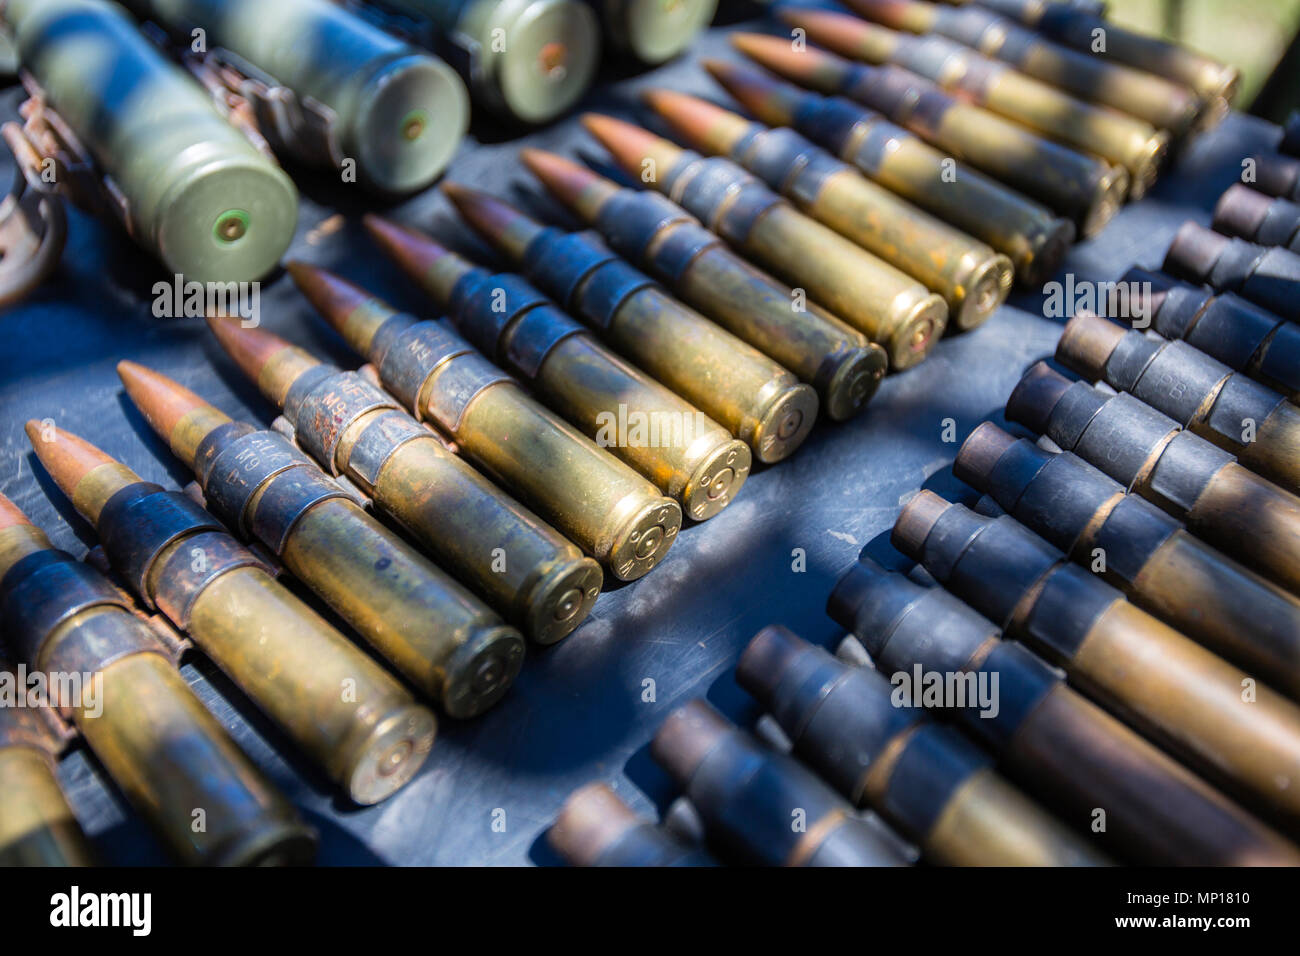 World War II ammunition display at the Central Texas Airshow Stock Photo